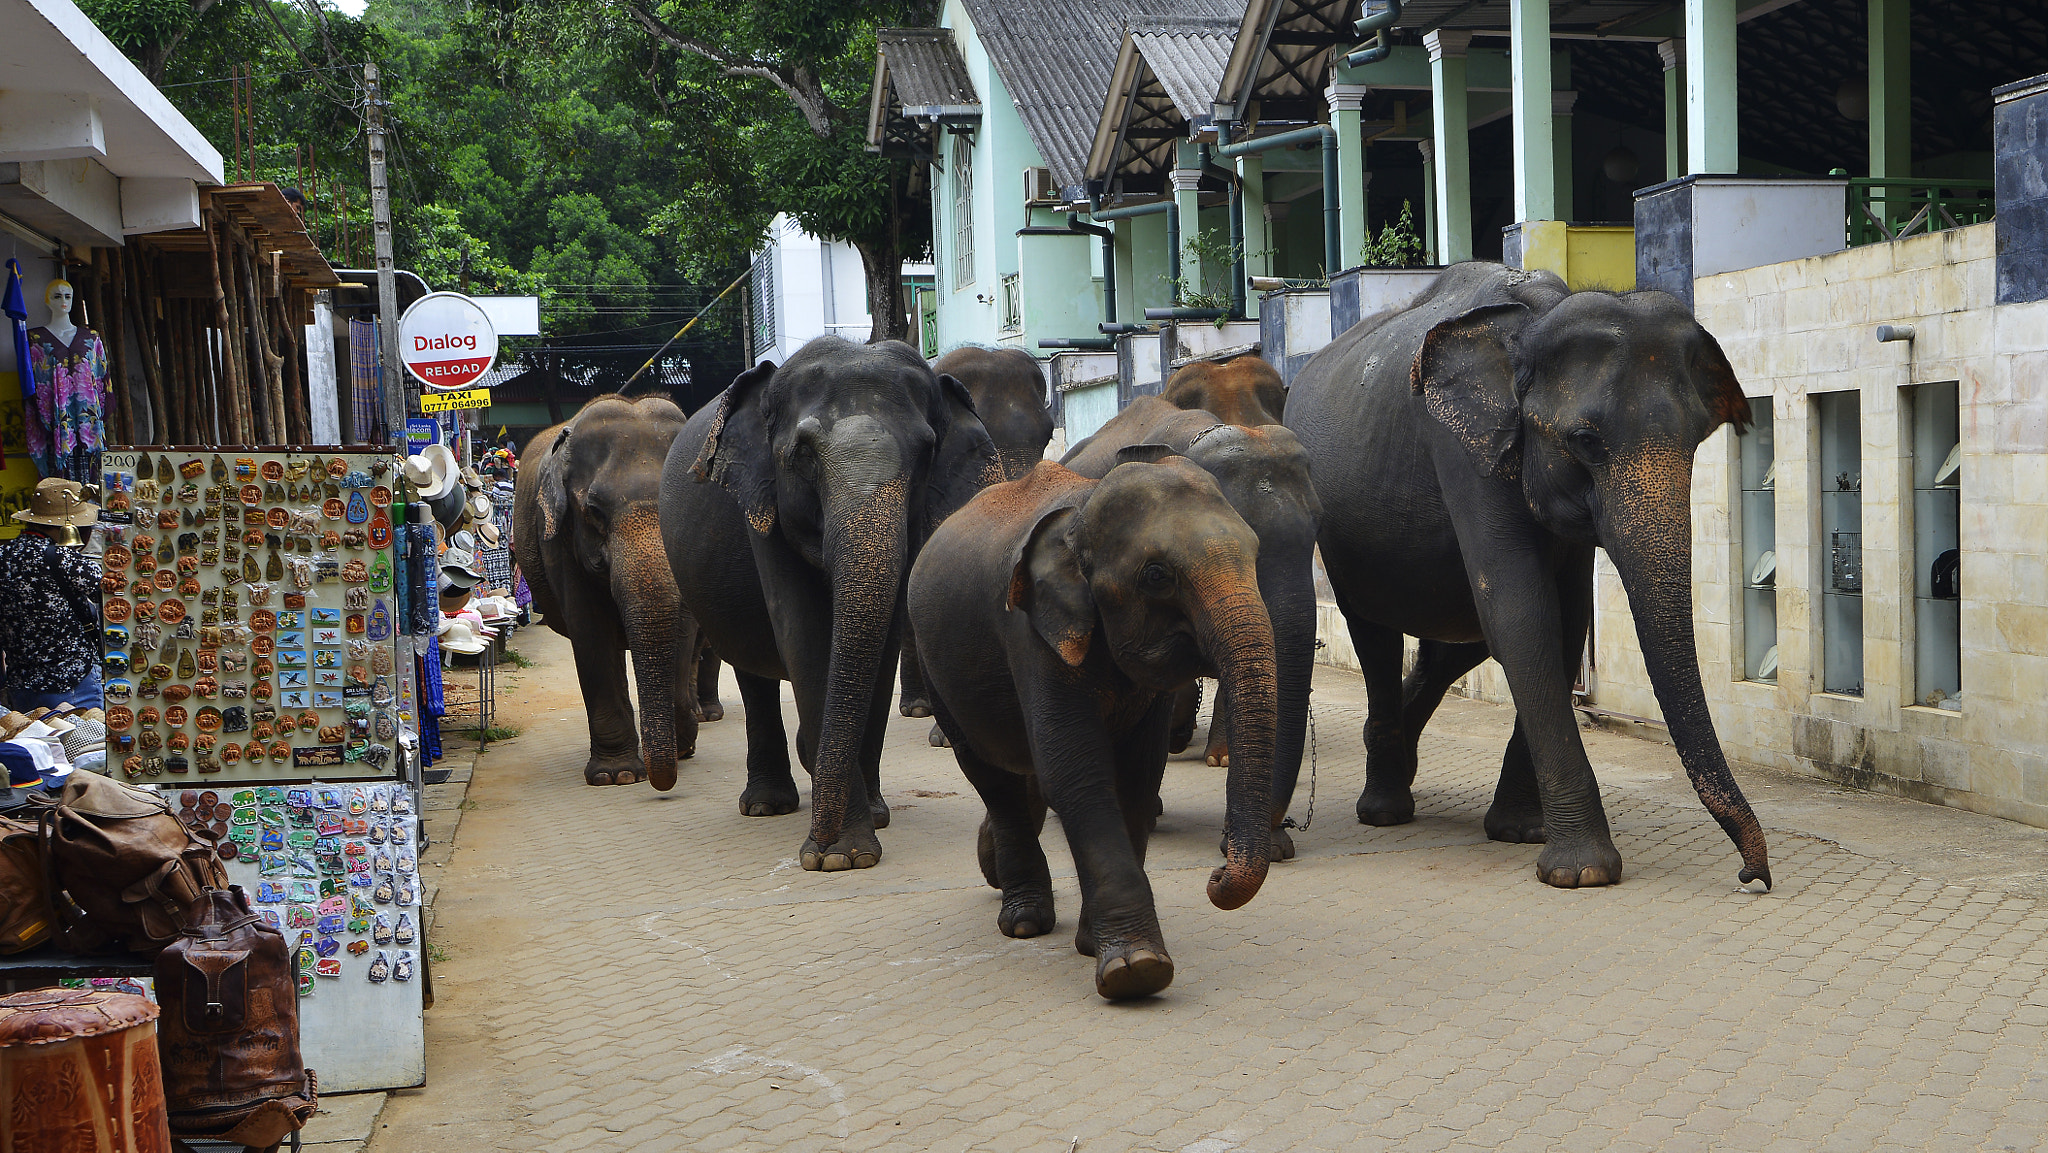 Nikon D800 sample photo. The elephants are coming photography